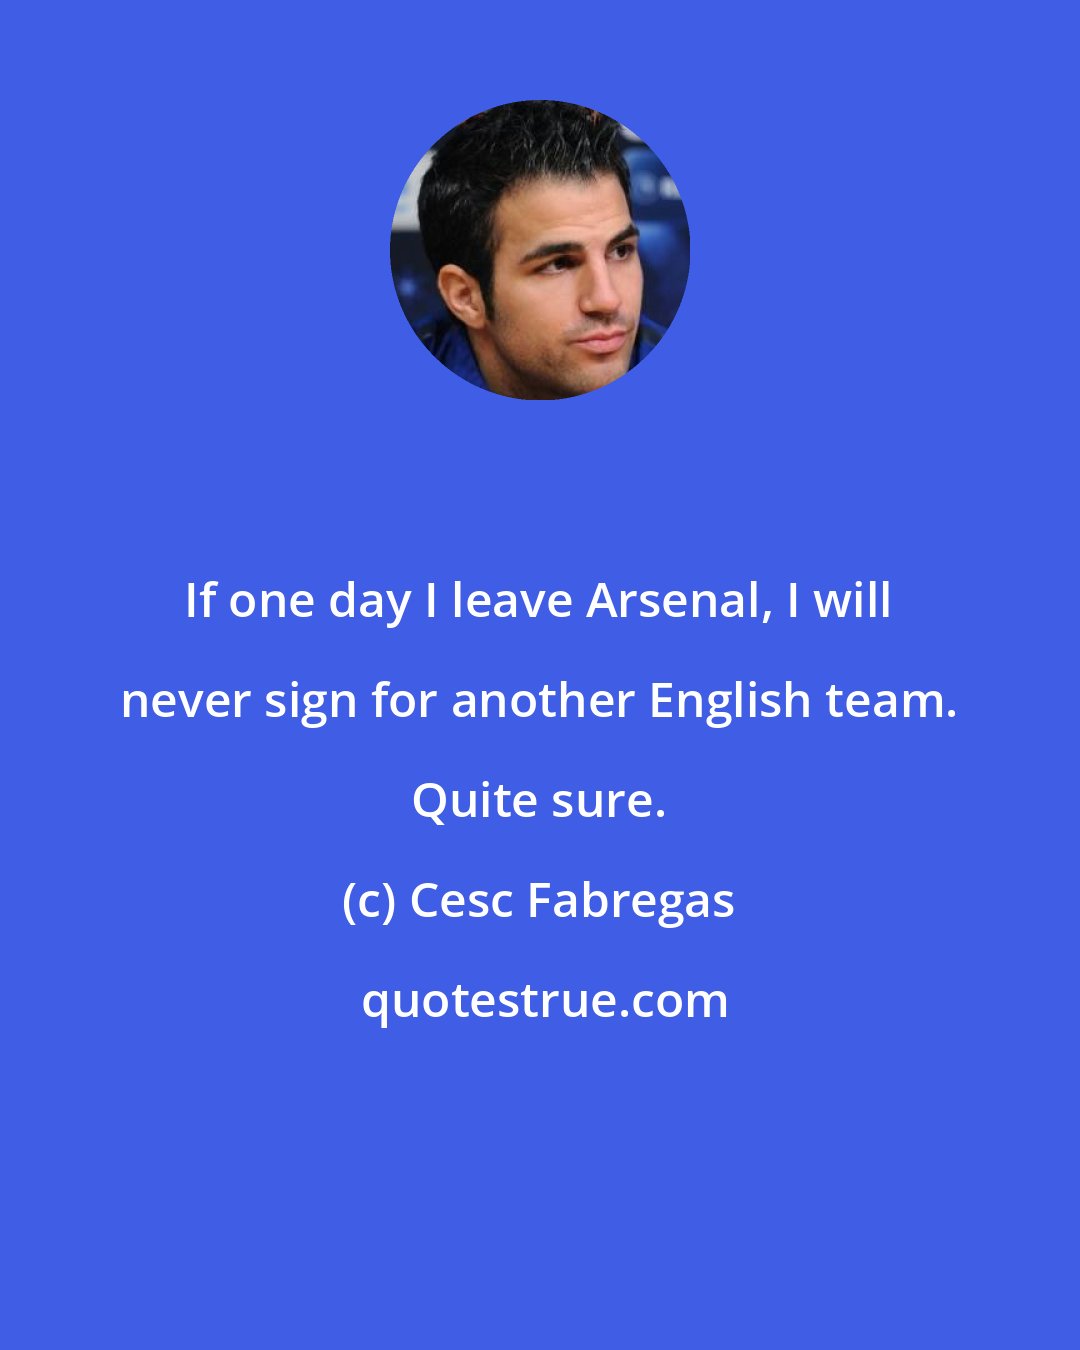 Cesc Fabregas: If one day I leave Arsenal, I will never sign for another English team. Quite sure.